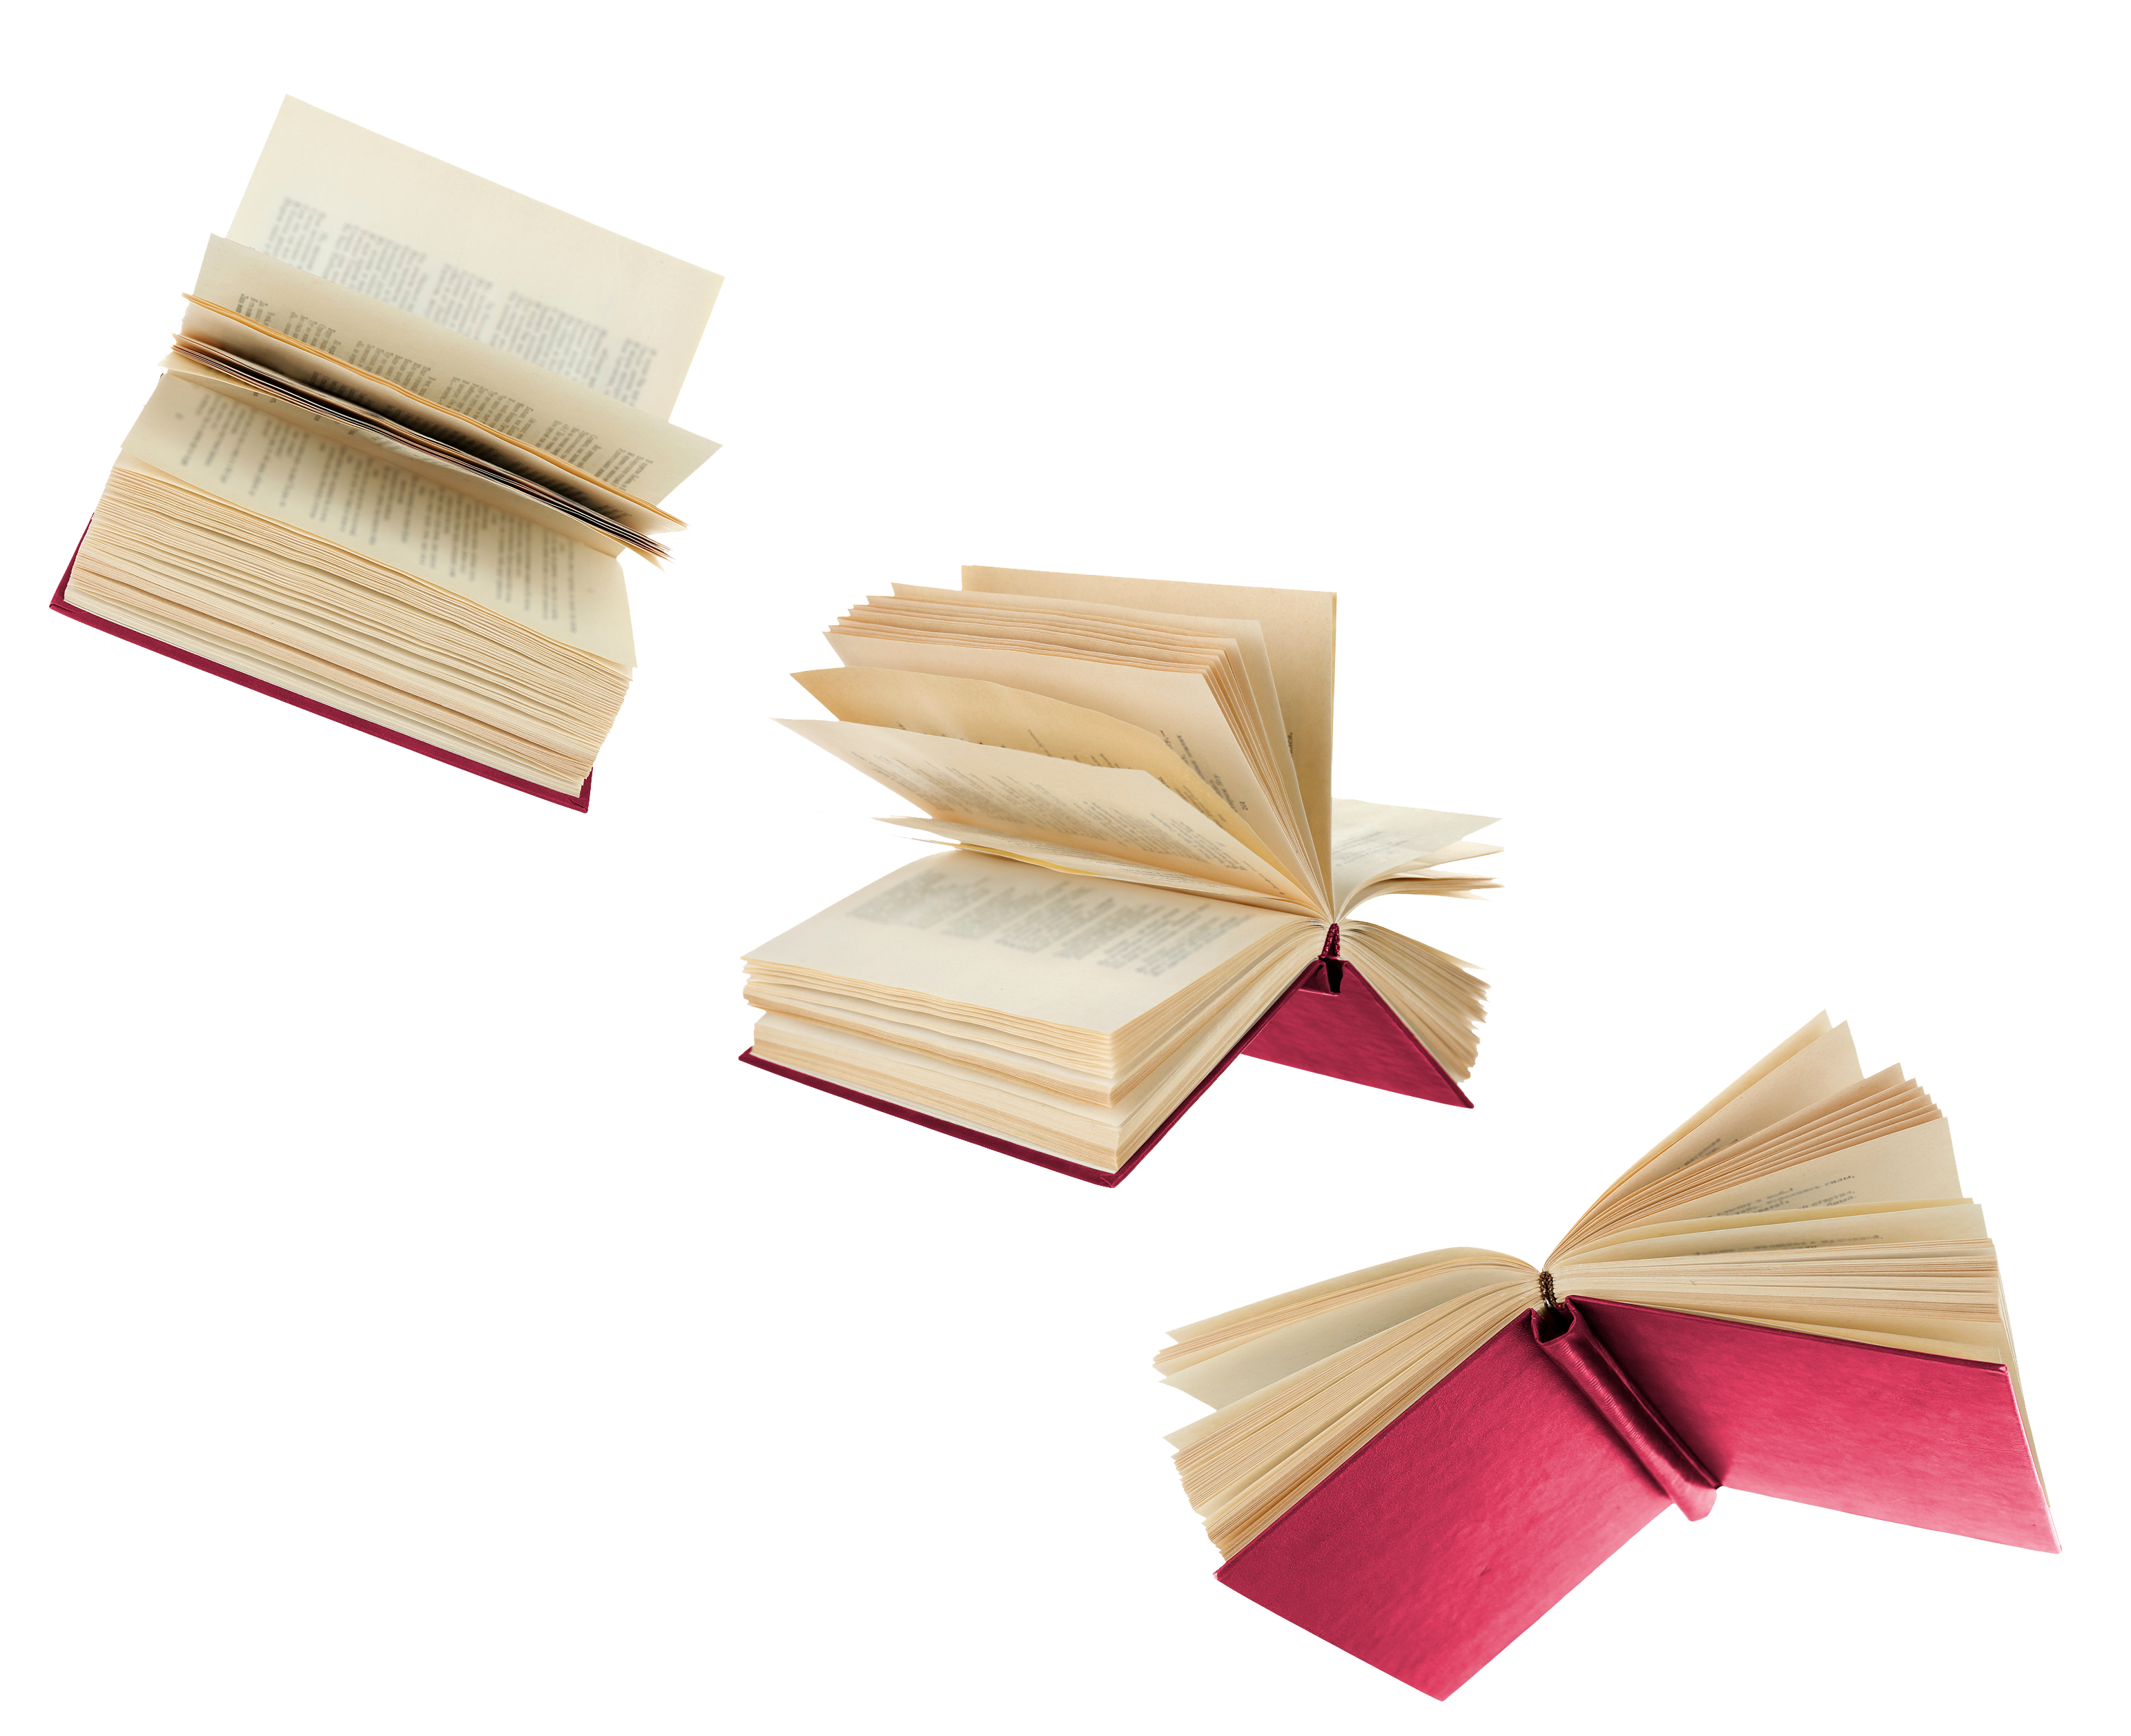 Flying books with red covers